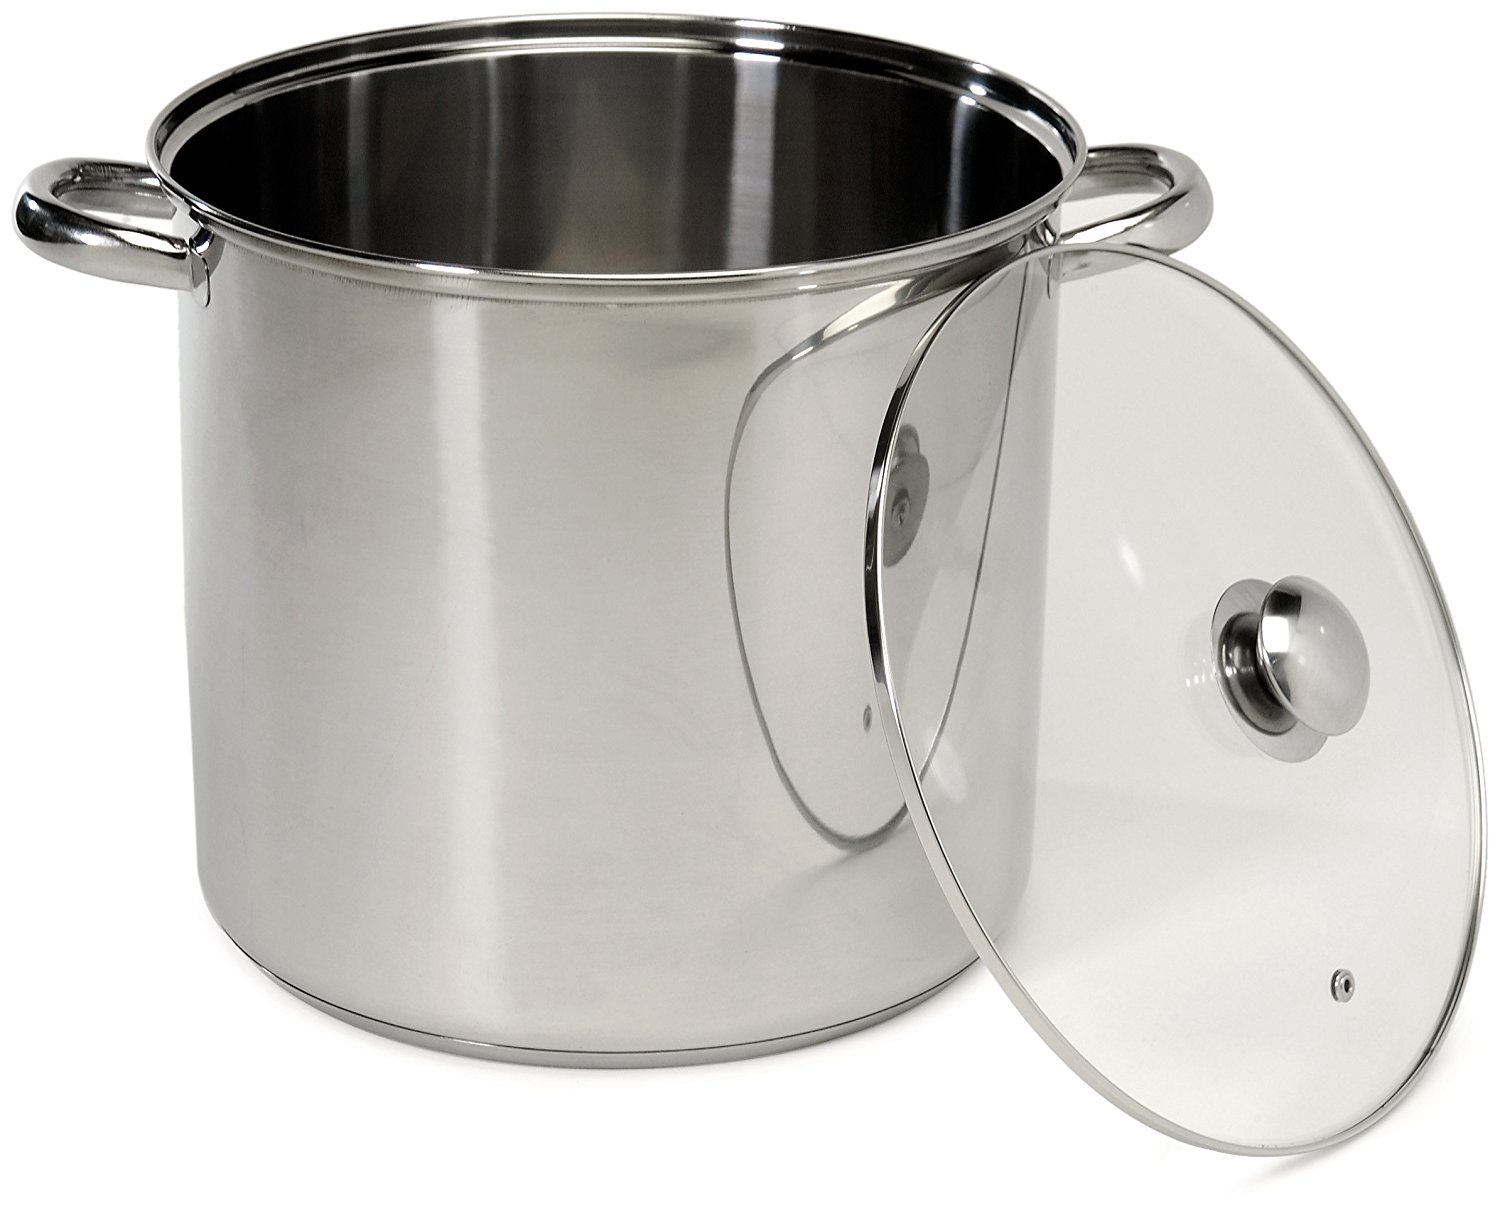 Excelsteel 16 Quart Stainless Steel Stockpot With Encapsulated Base - Stainless Steel Pot